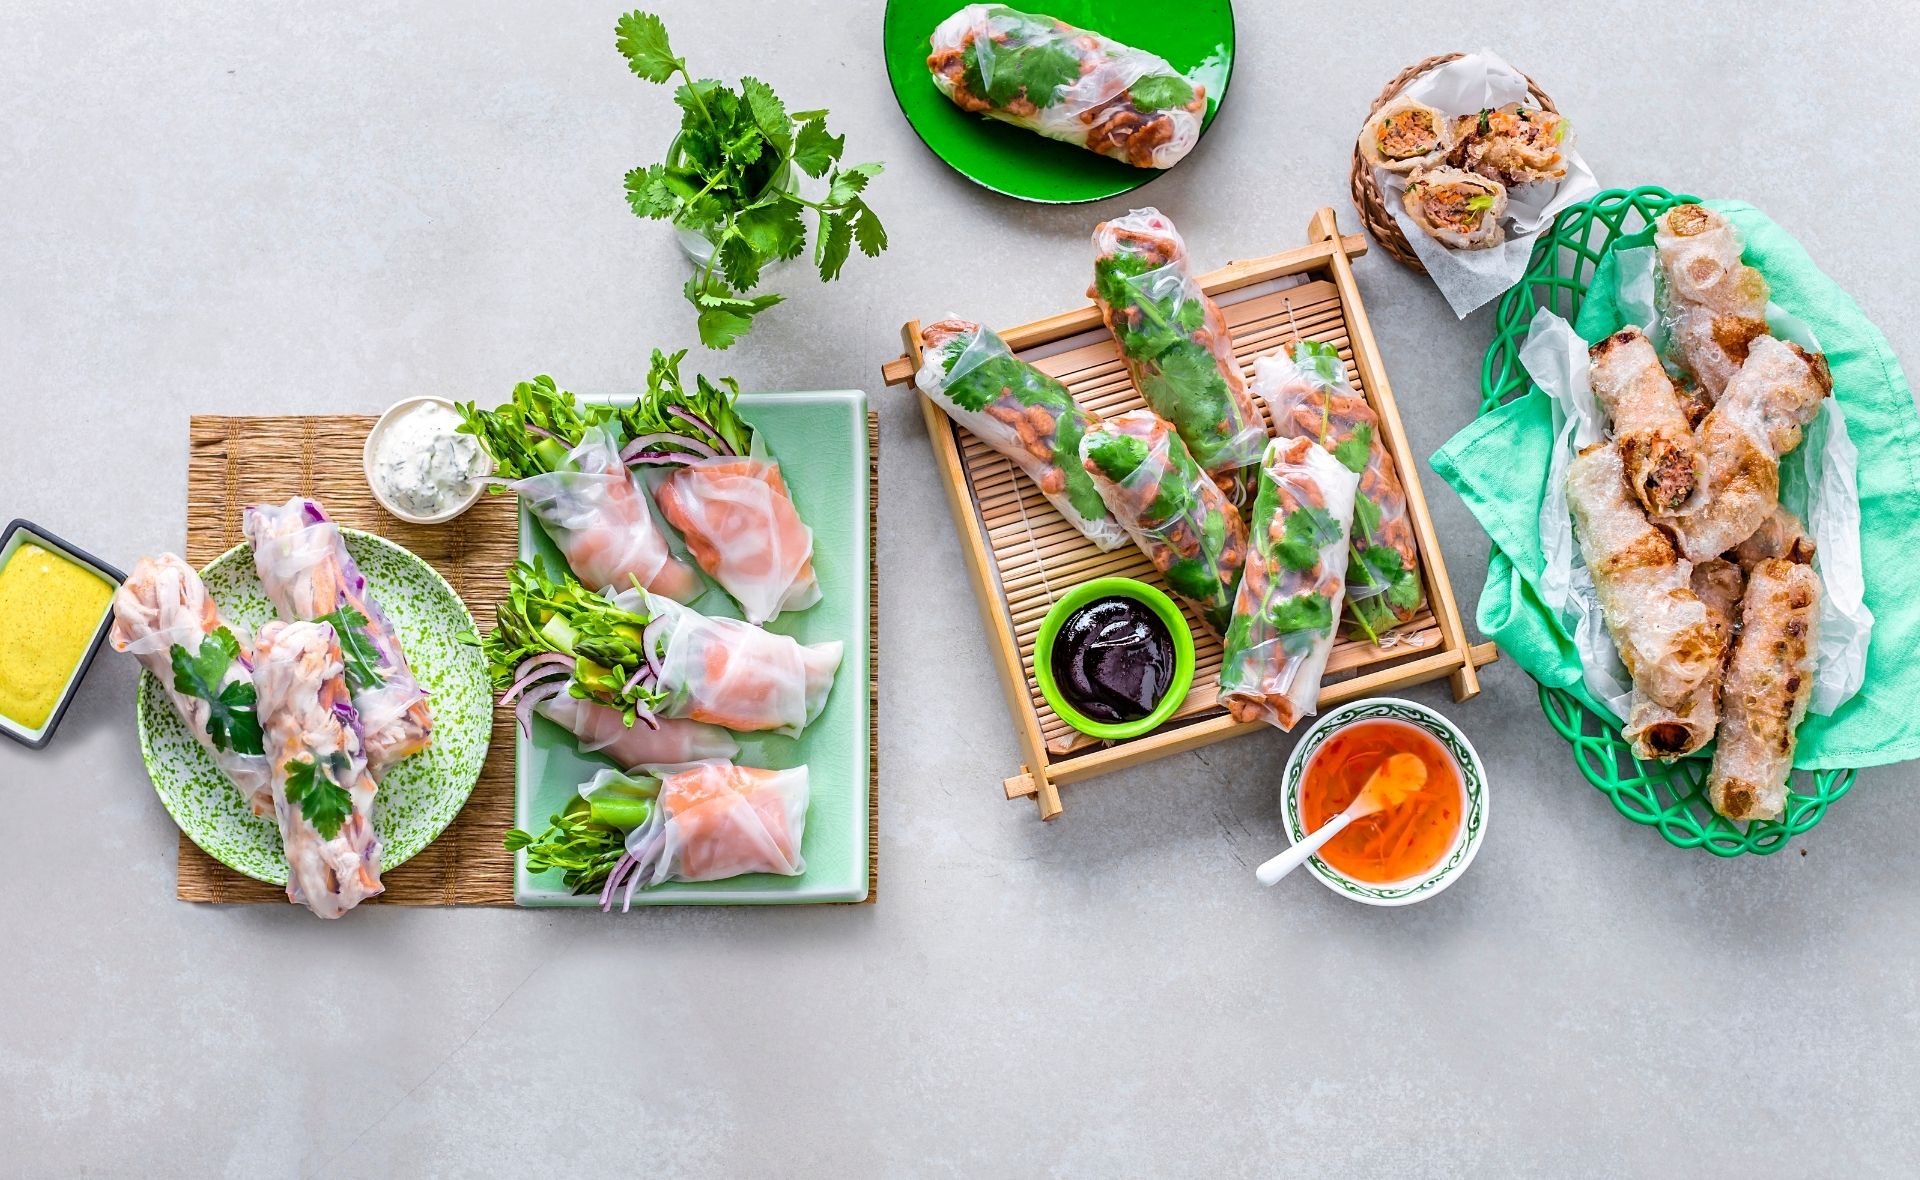 The best rice paper recipes!